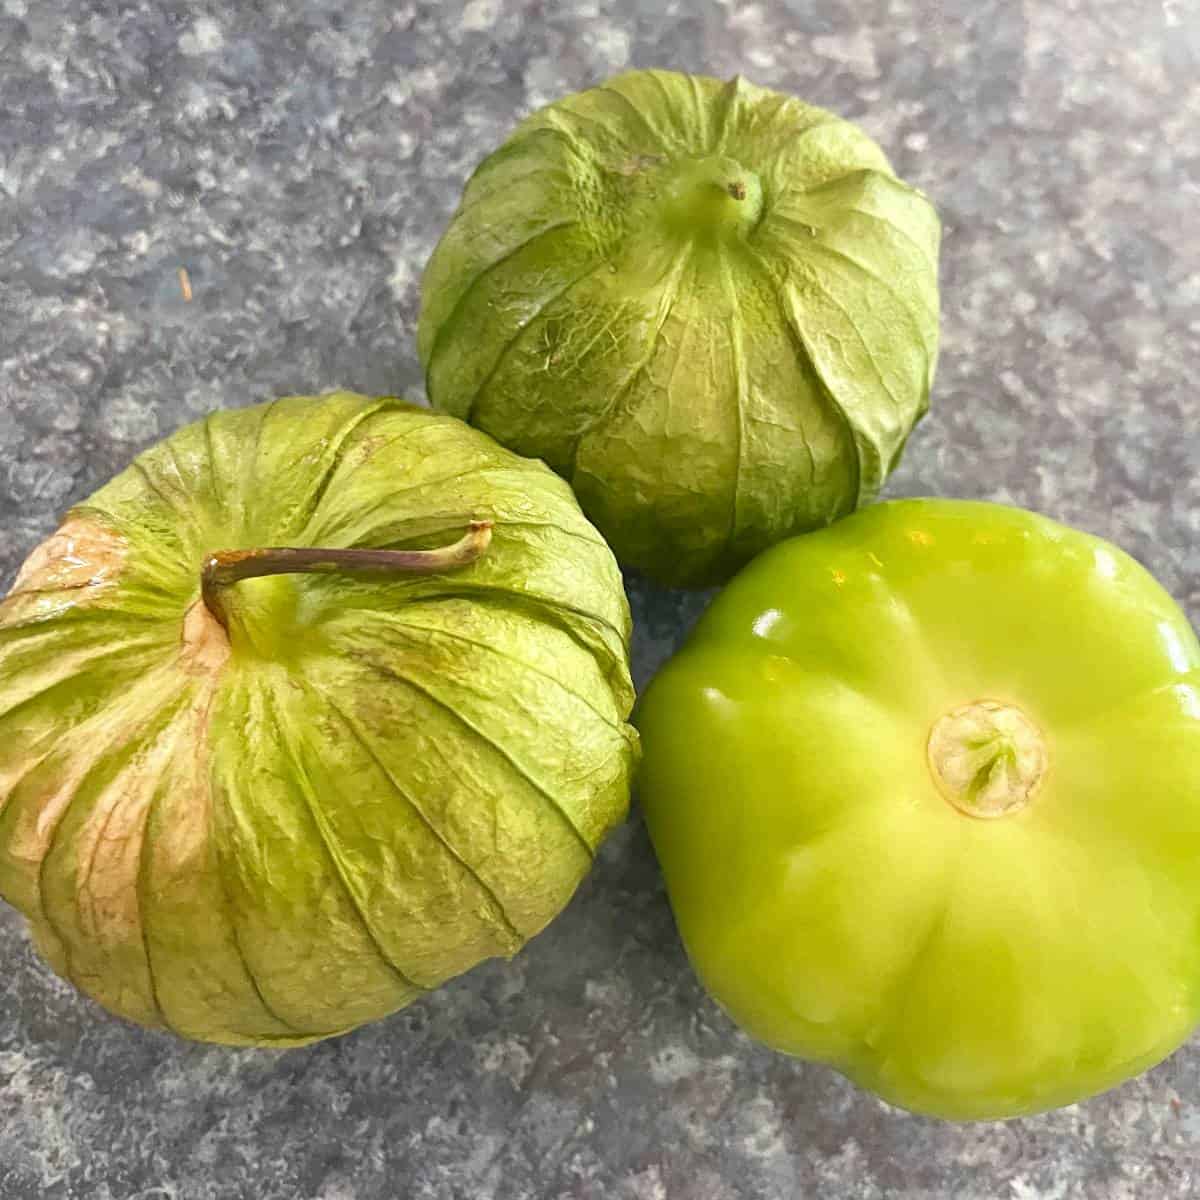 3 tomatillos on a blue counter top. 2 of the tomatillos have their husk on, one has it removed.